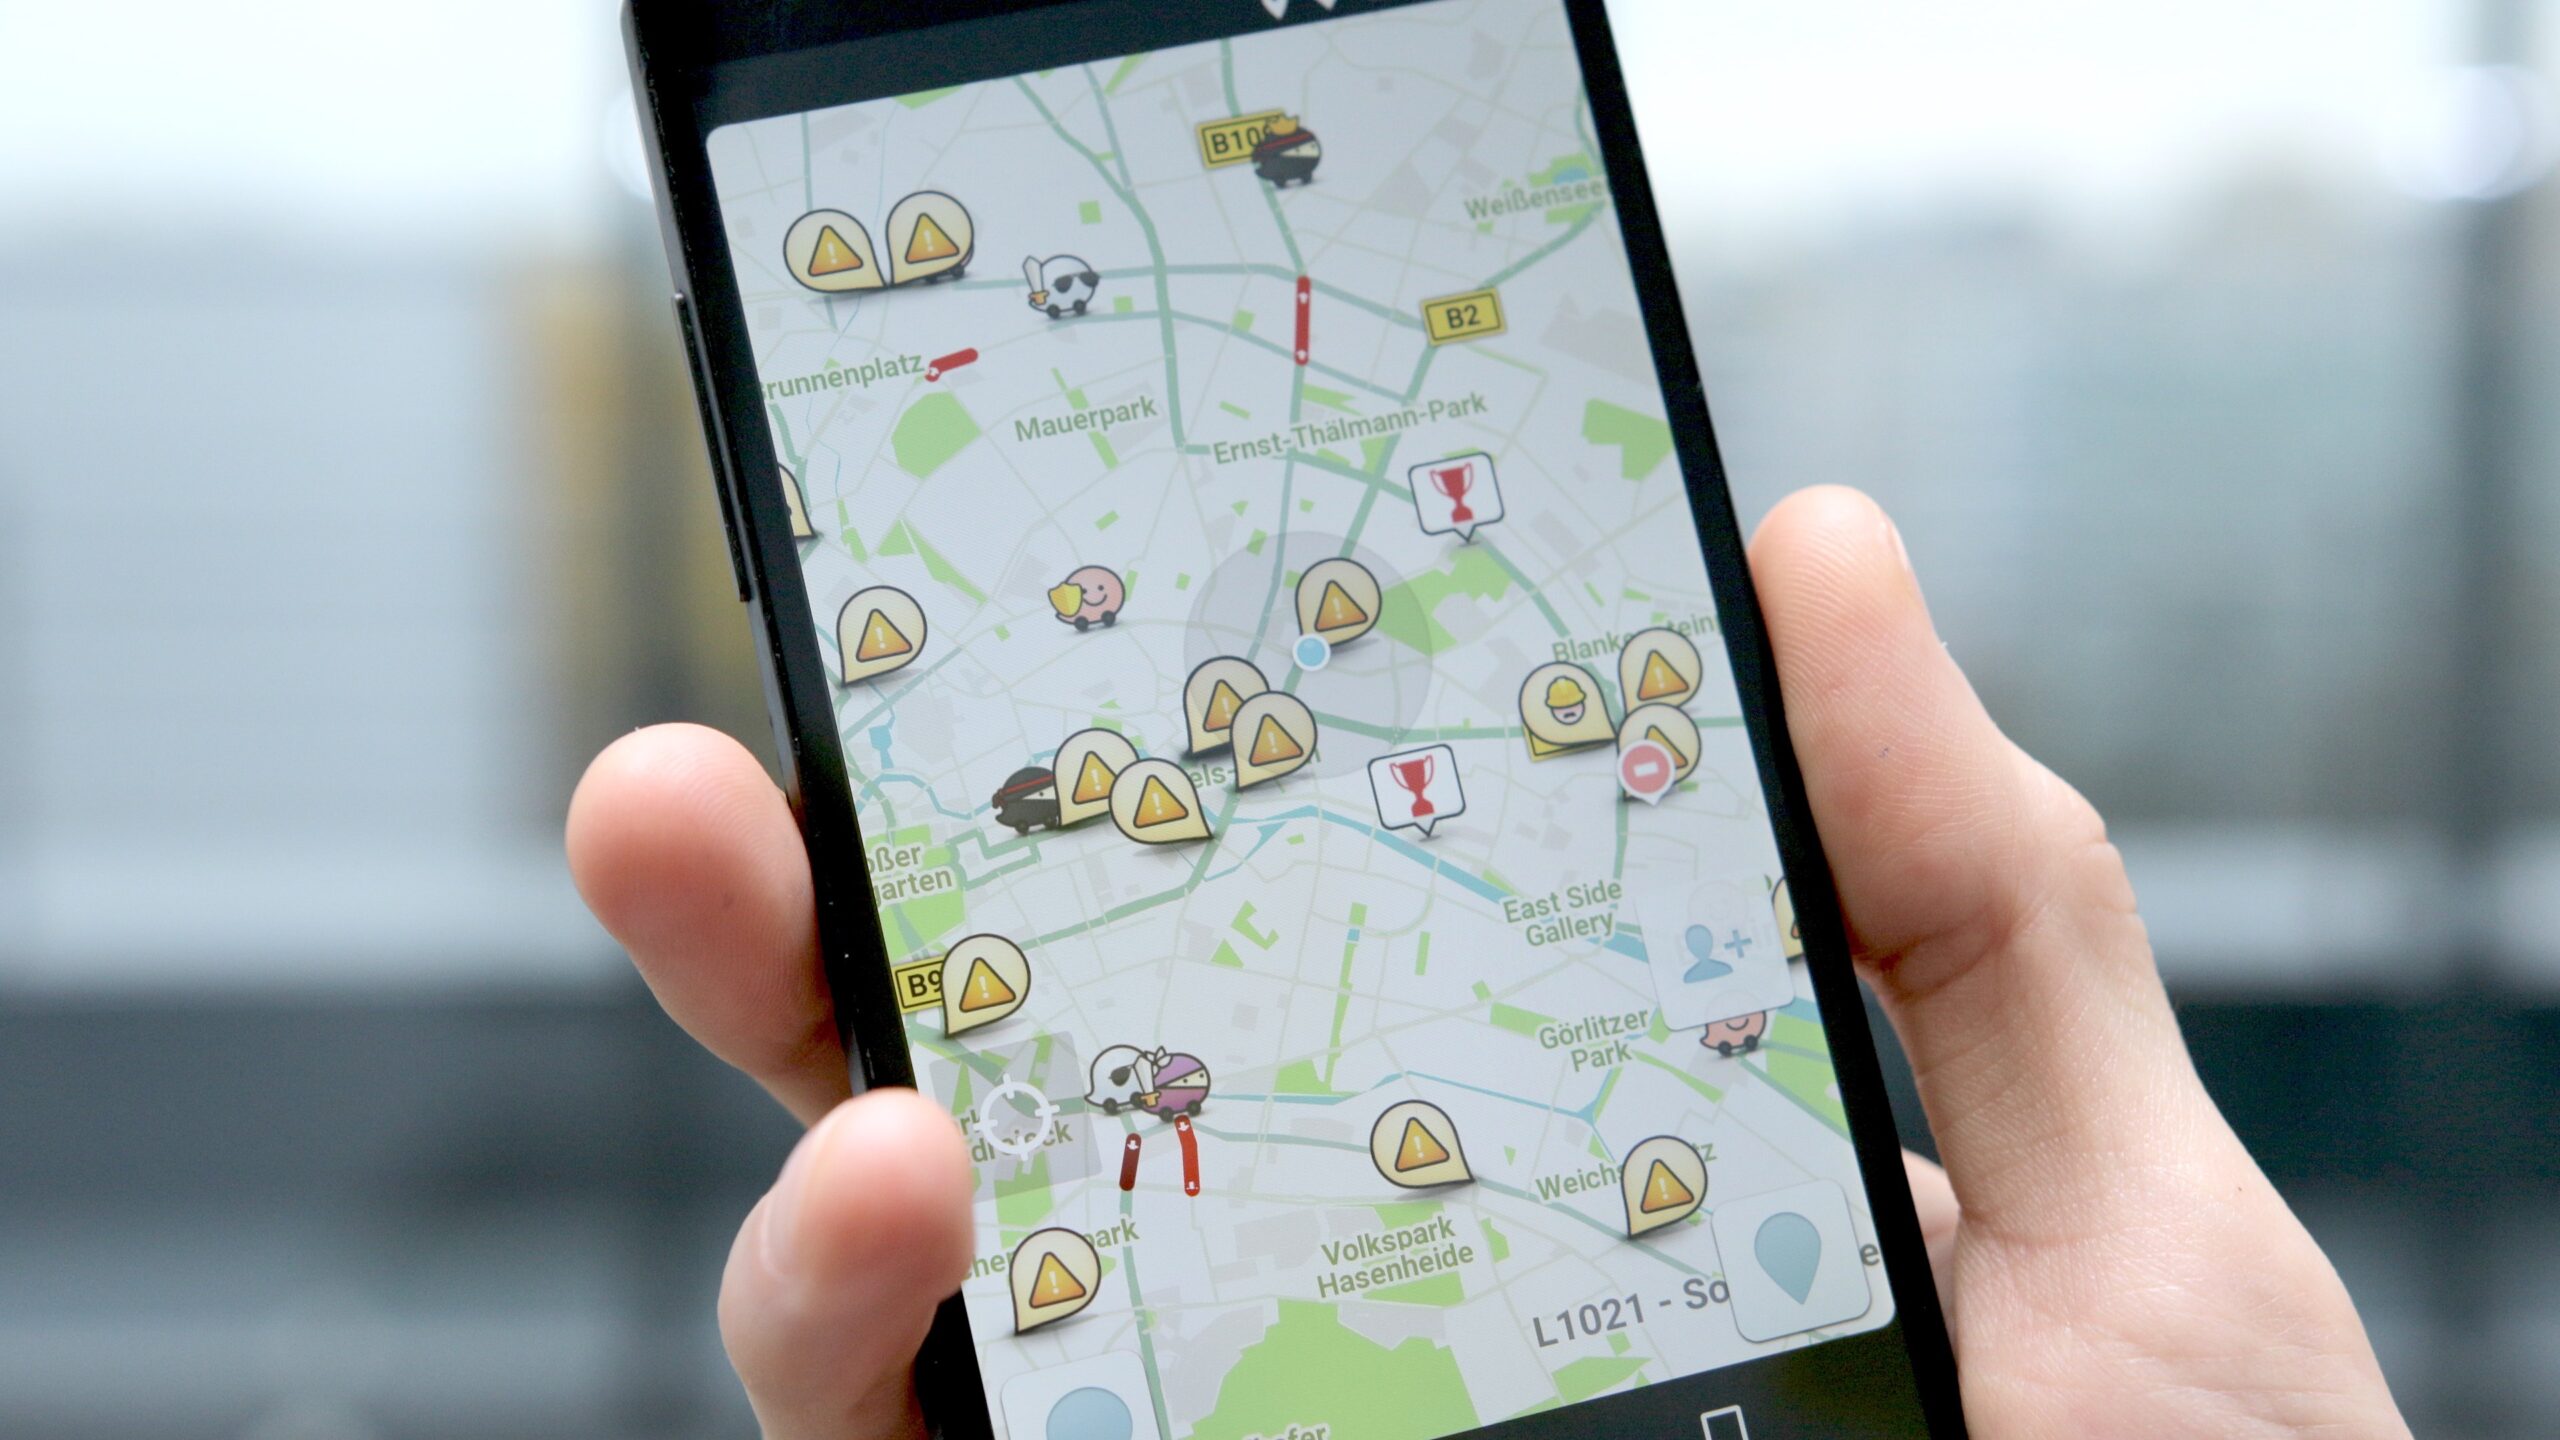 The sobriety of Google Maps or the Waze collaborative system: which do you prefer?